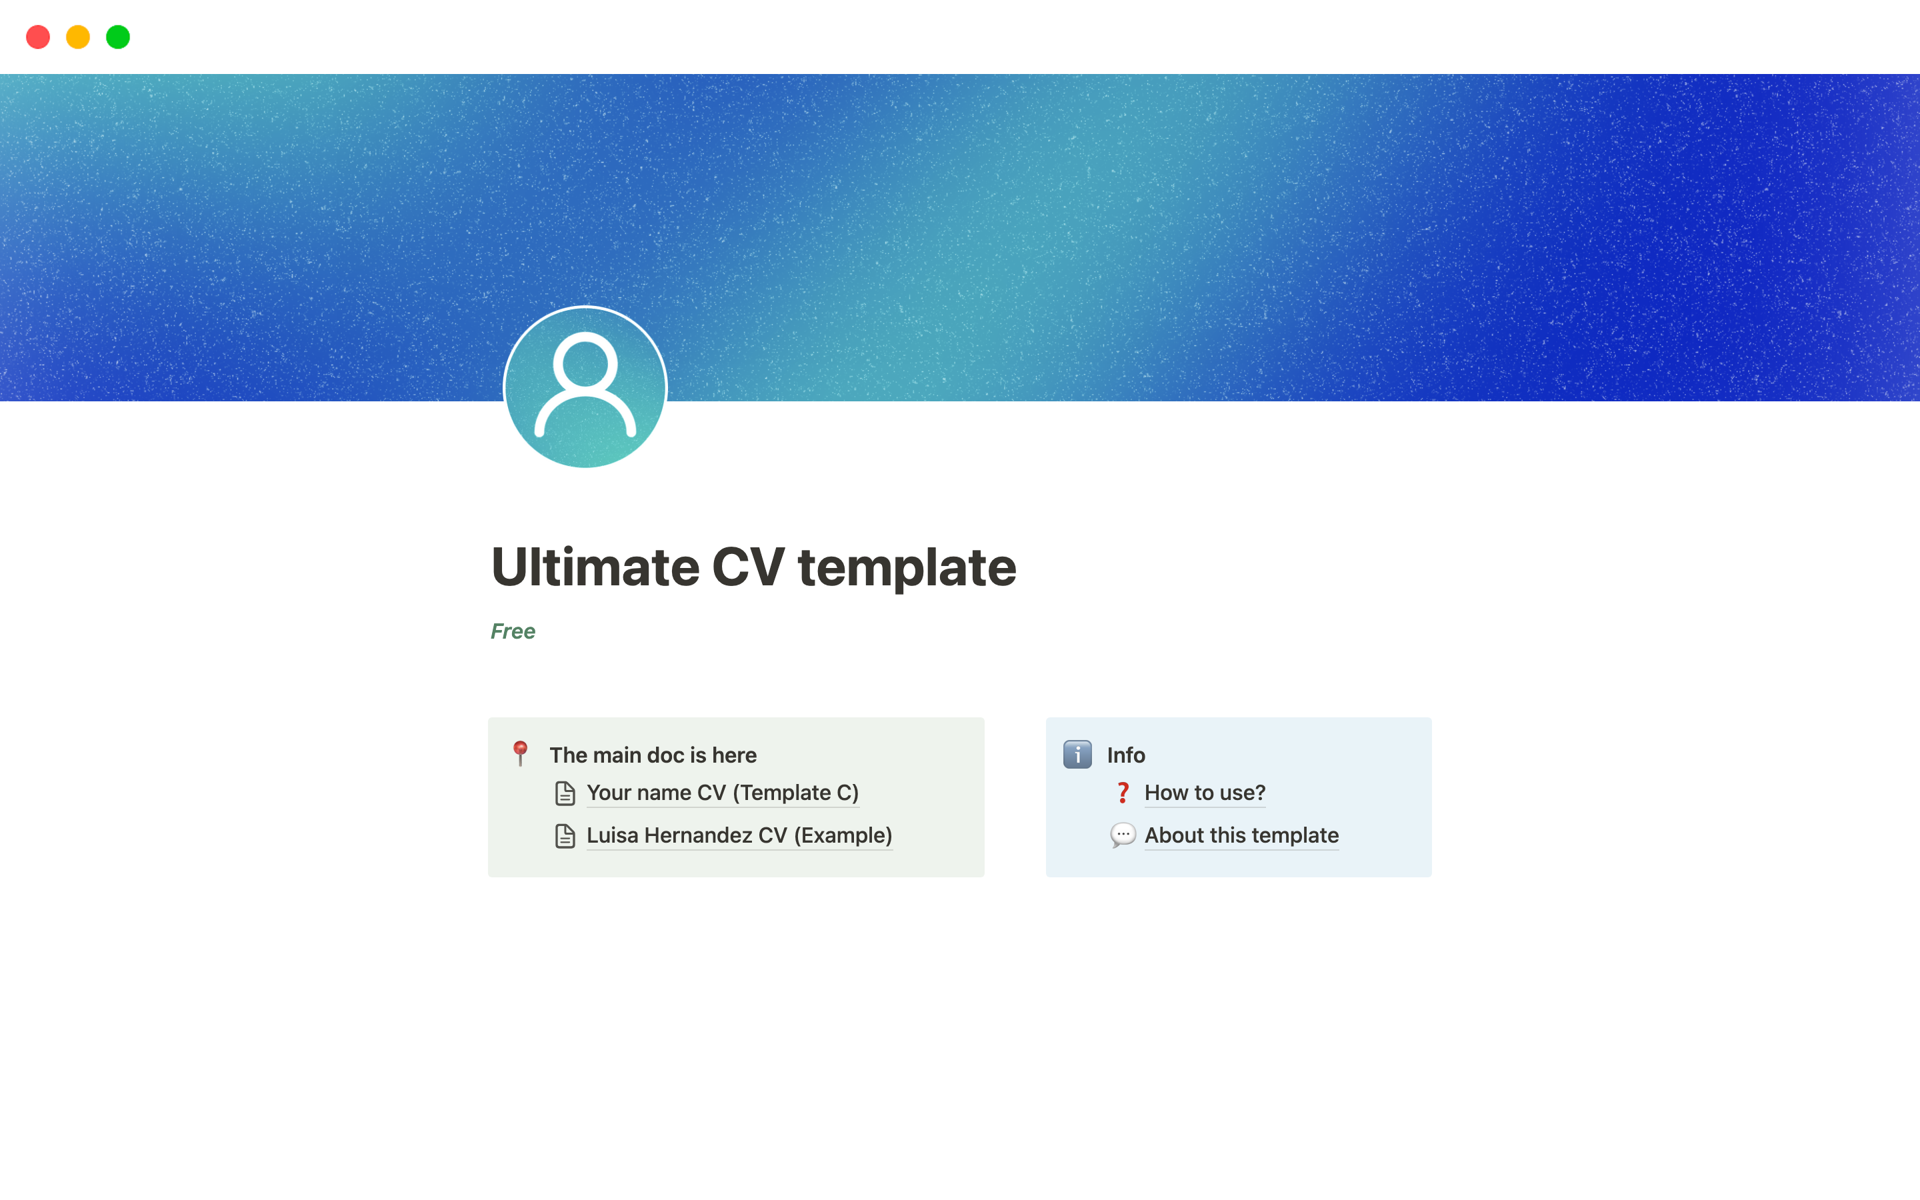 Ultimate CV template based on best practices.